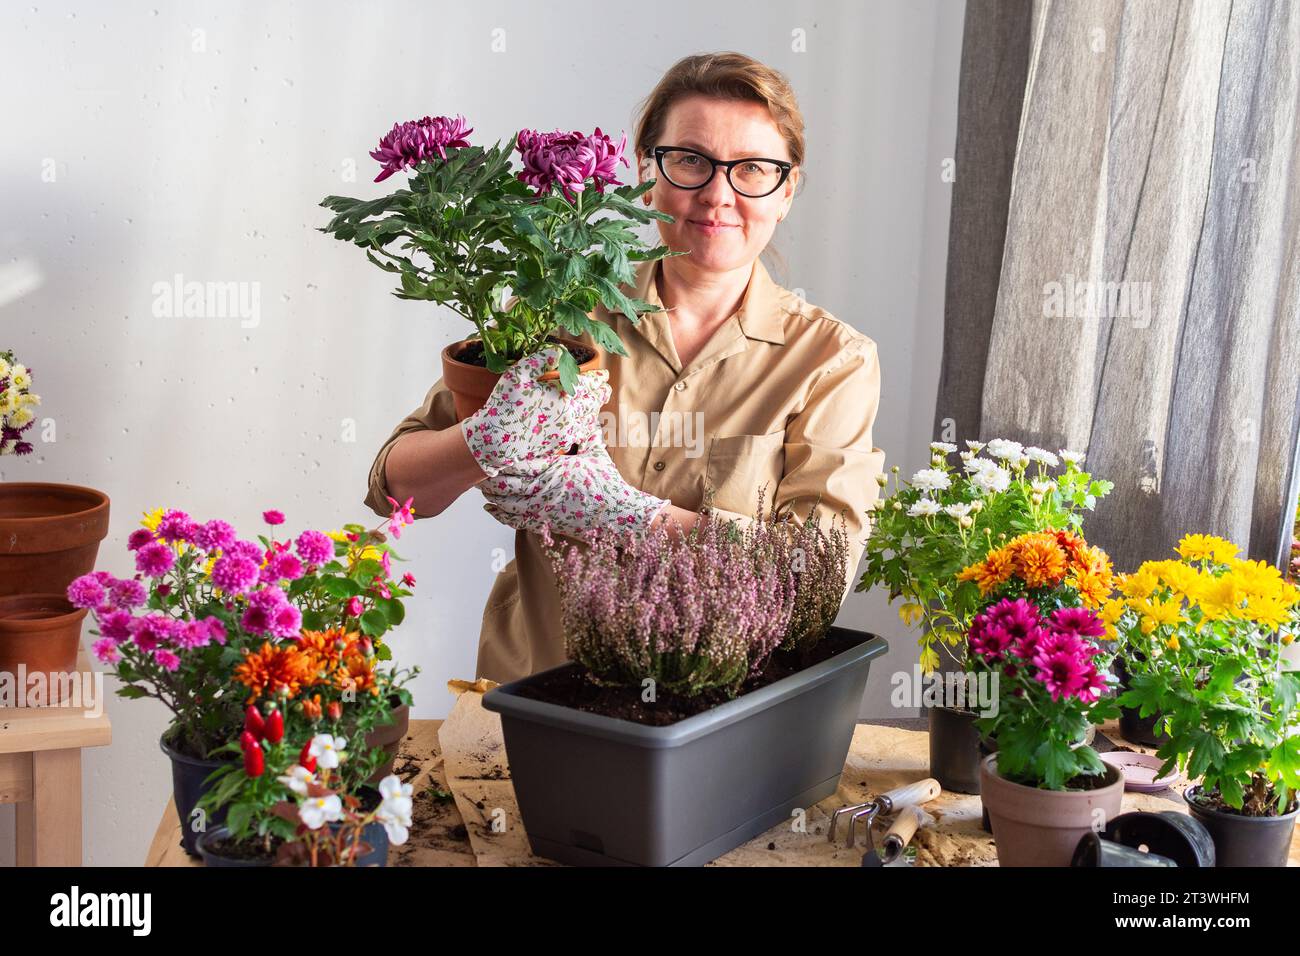 Woman 50 years old transplanting autumn flowers chrysanthemums and heathers into pots and holding a pot with a chrysanthemum and smiling Stock Photo